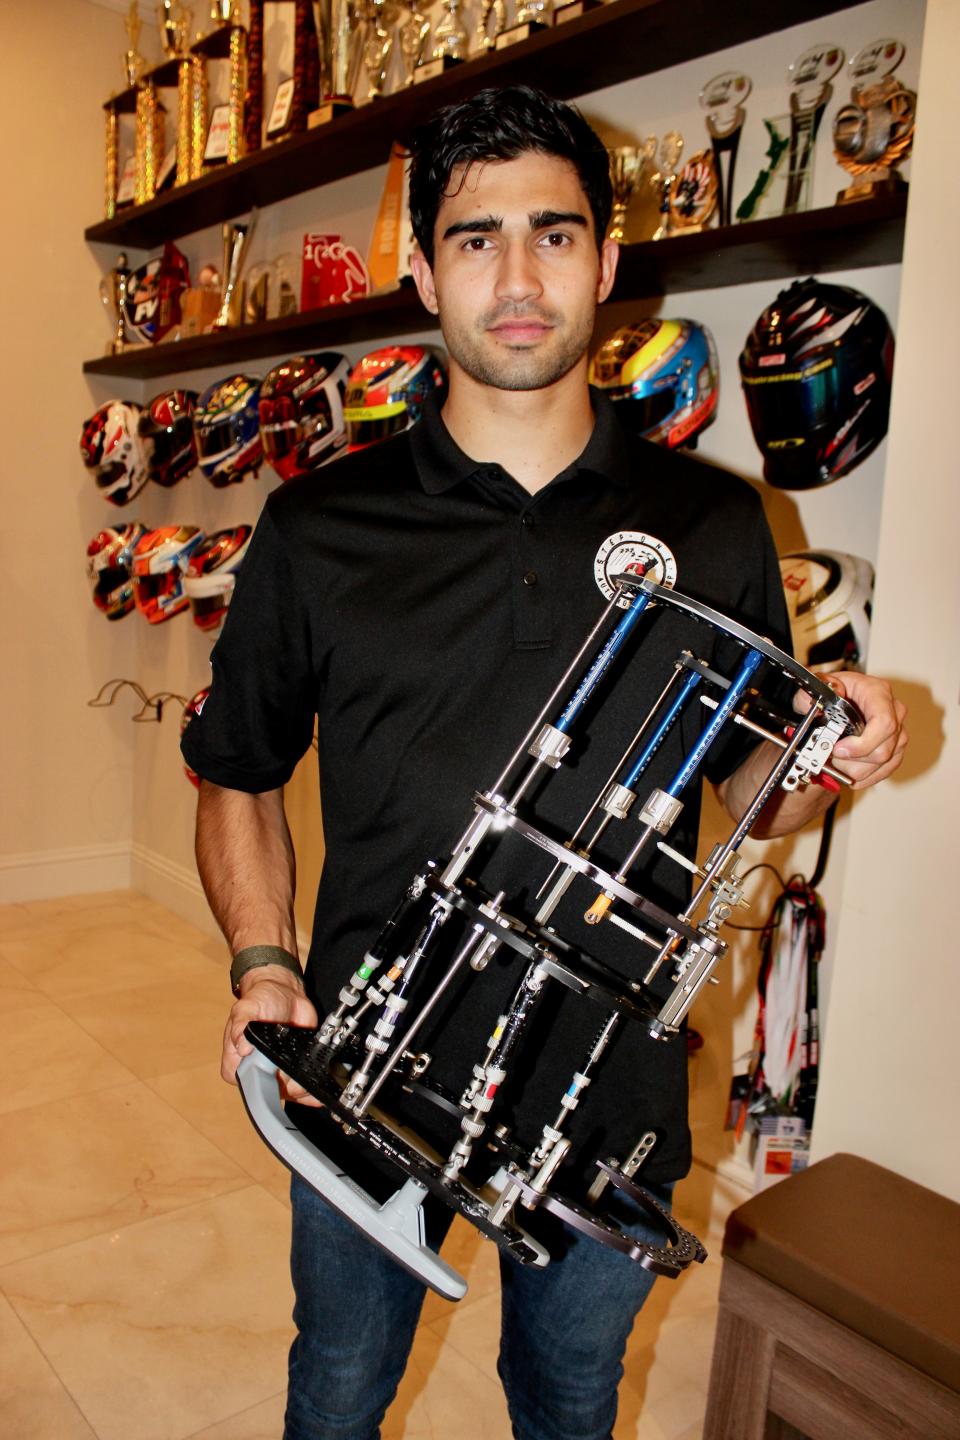 Race driver Juan Manuel Correa holds the exoskeleton he had to wear for more than three months to help his right leg heal following a crash that killed driver Anthoine Hubert in 2019.